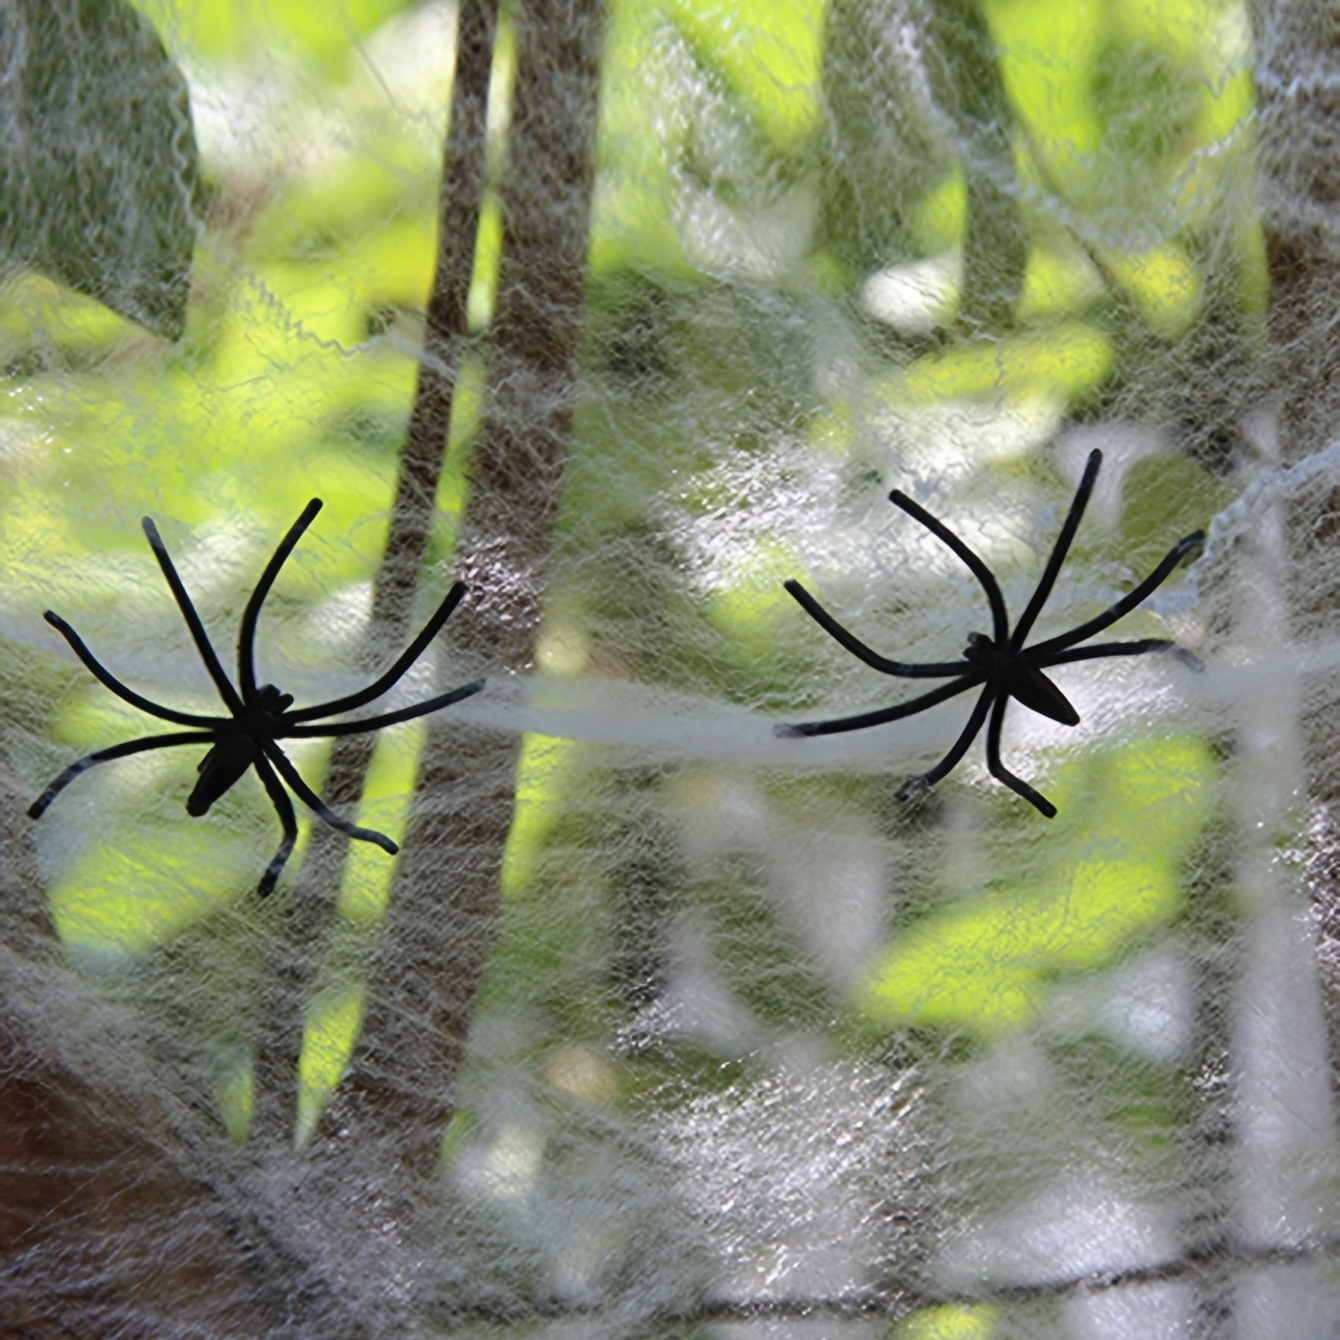 Why Spiders Decorate Their Webs